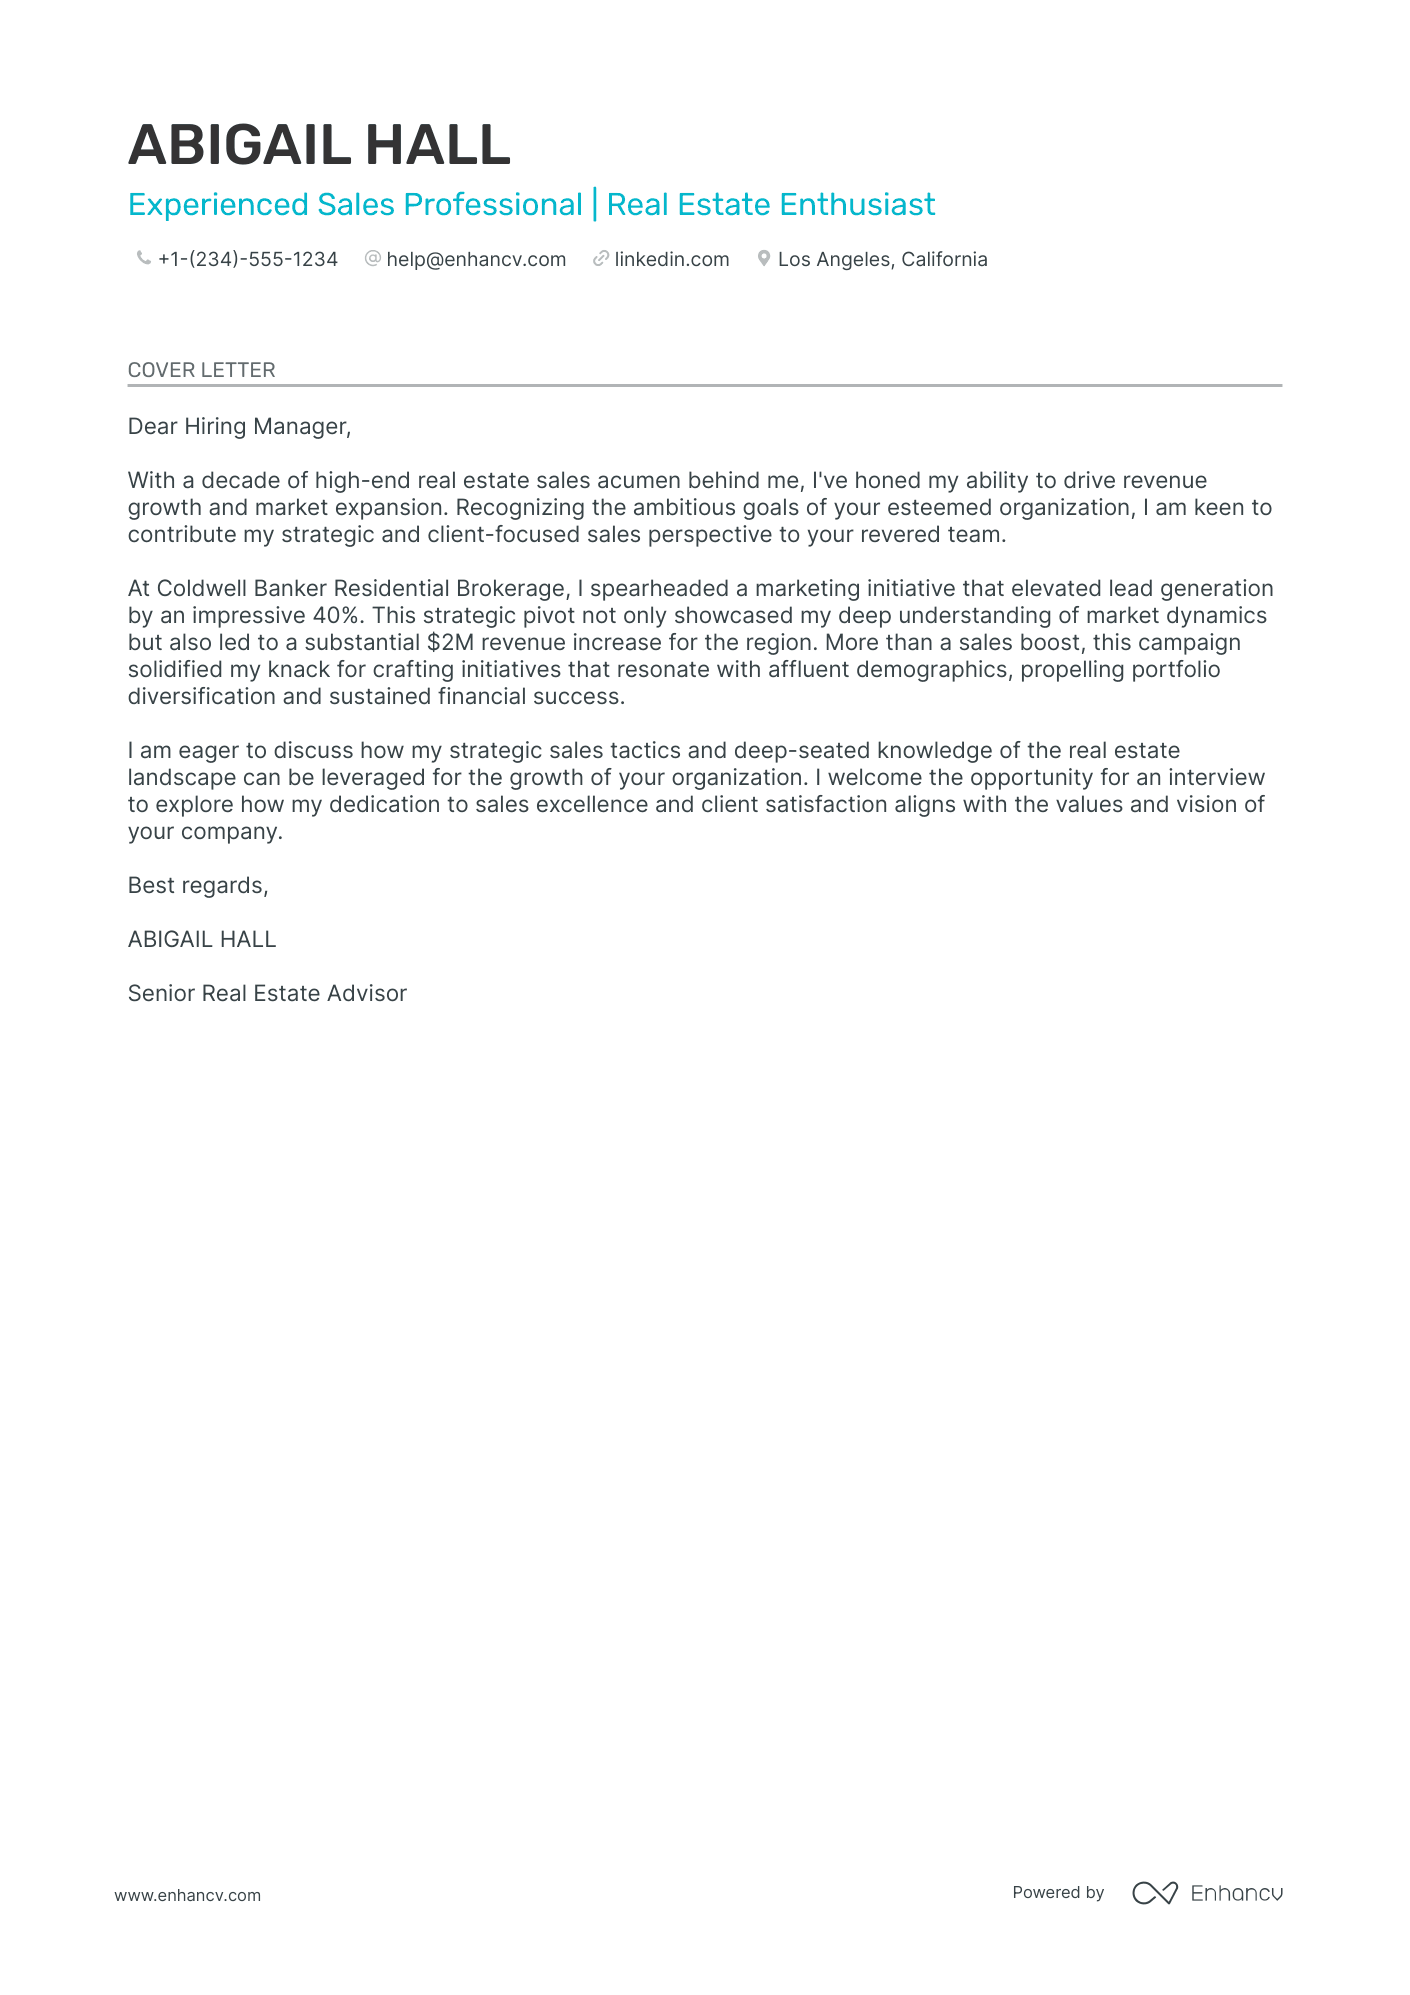 New Home Sales Consultant cover letter